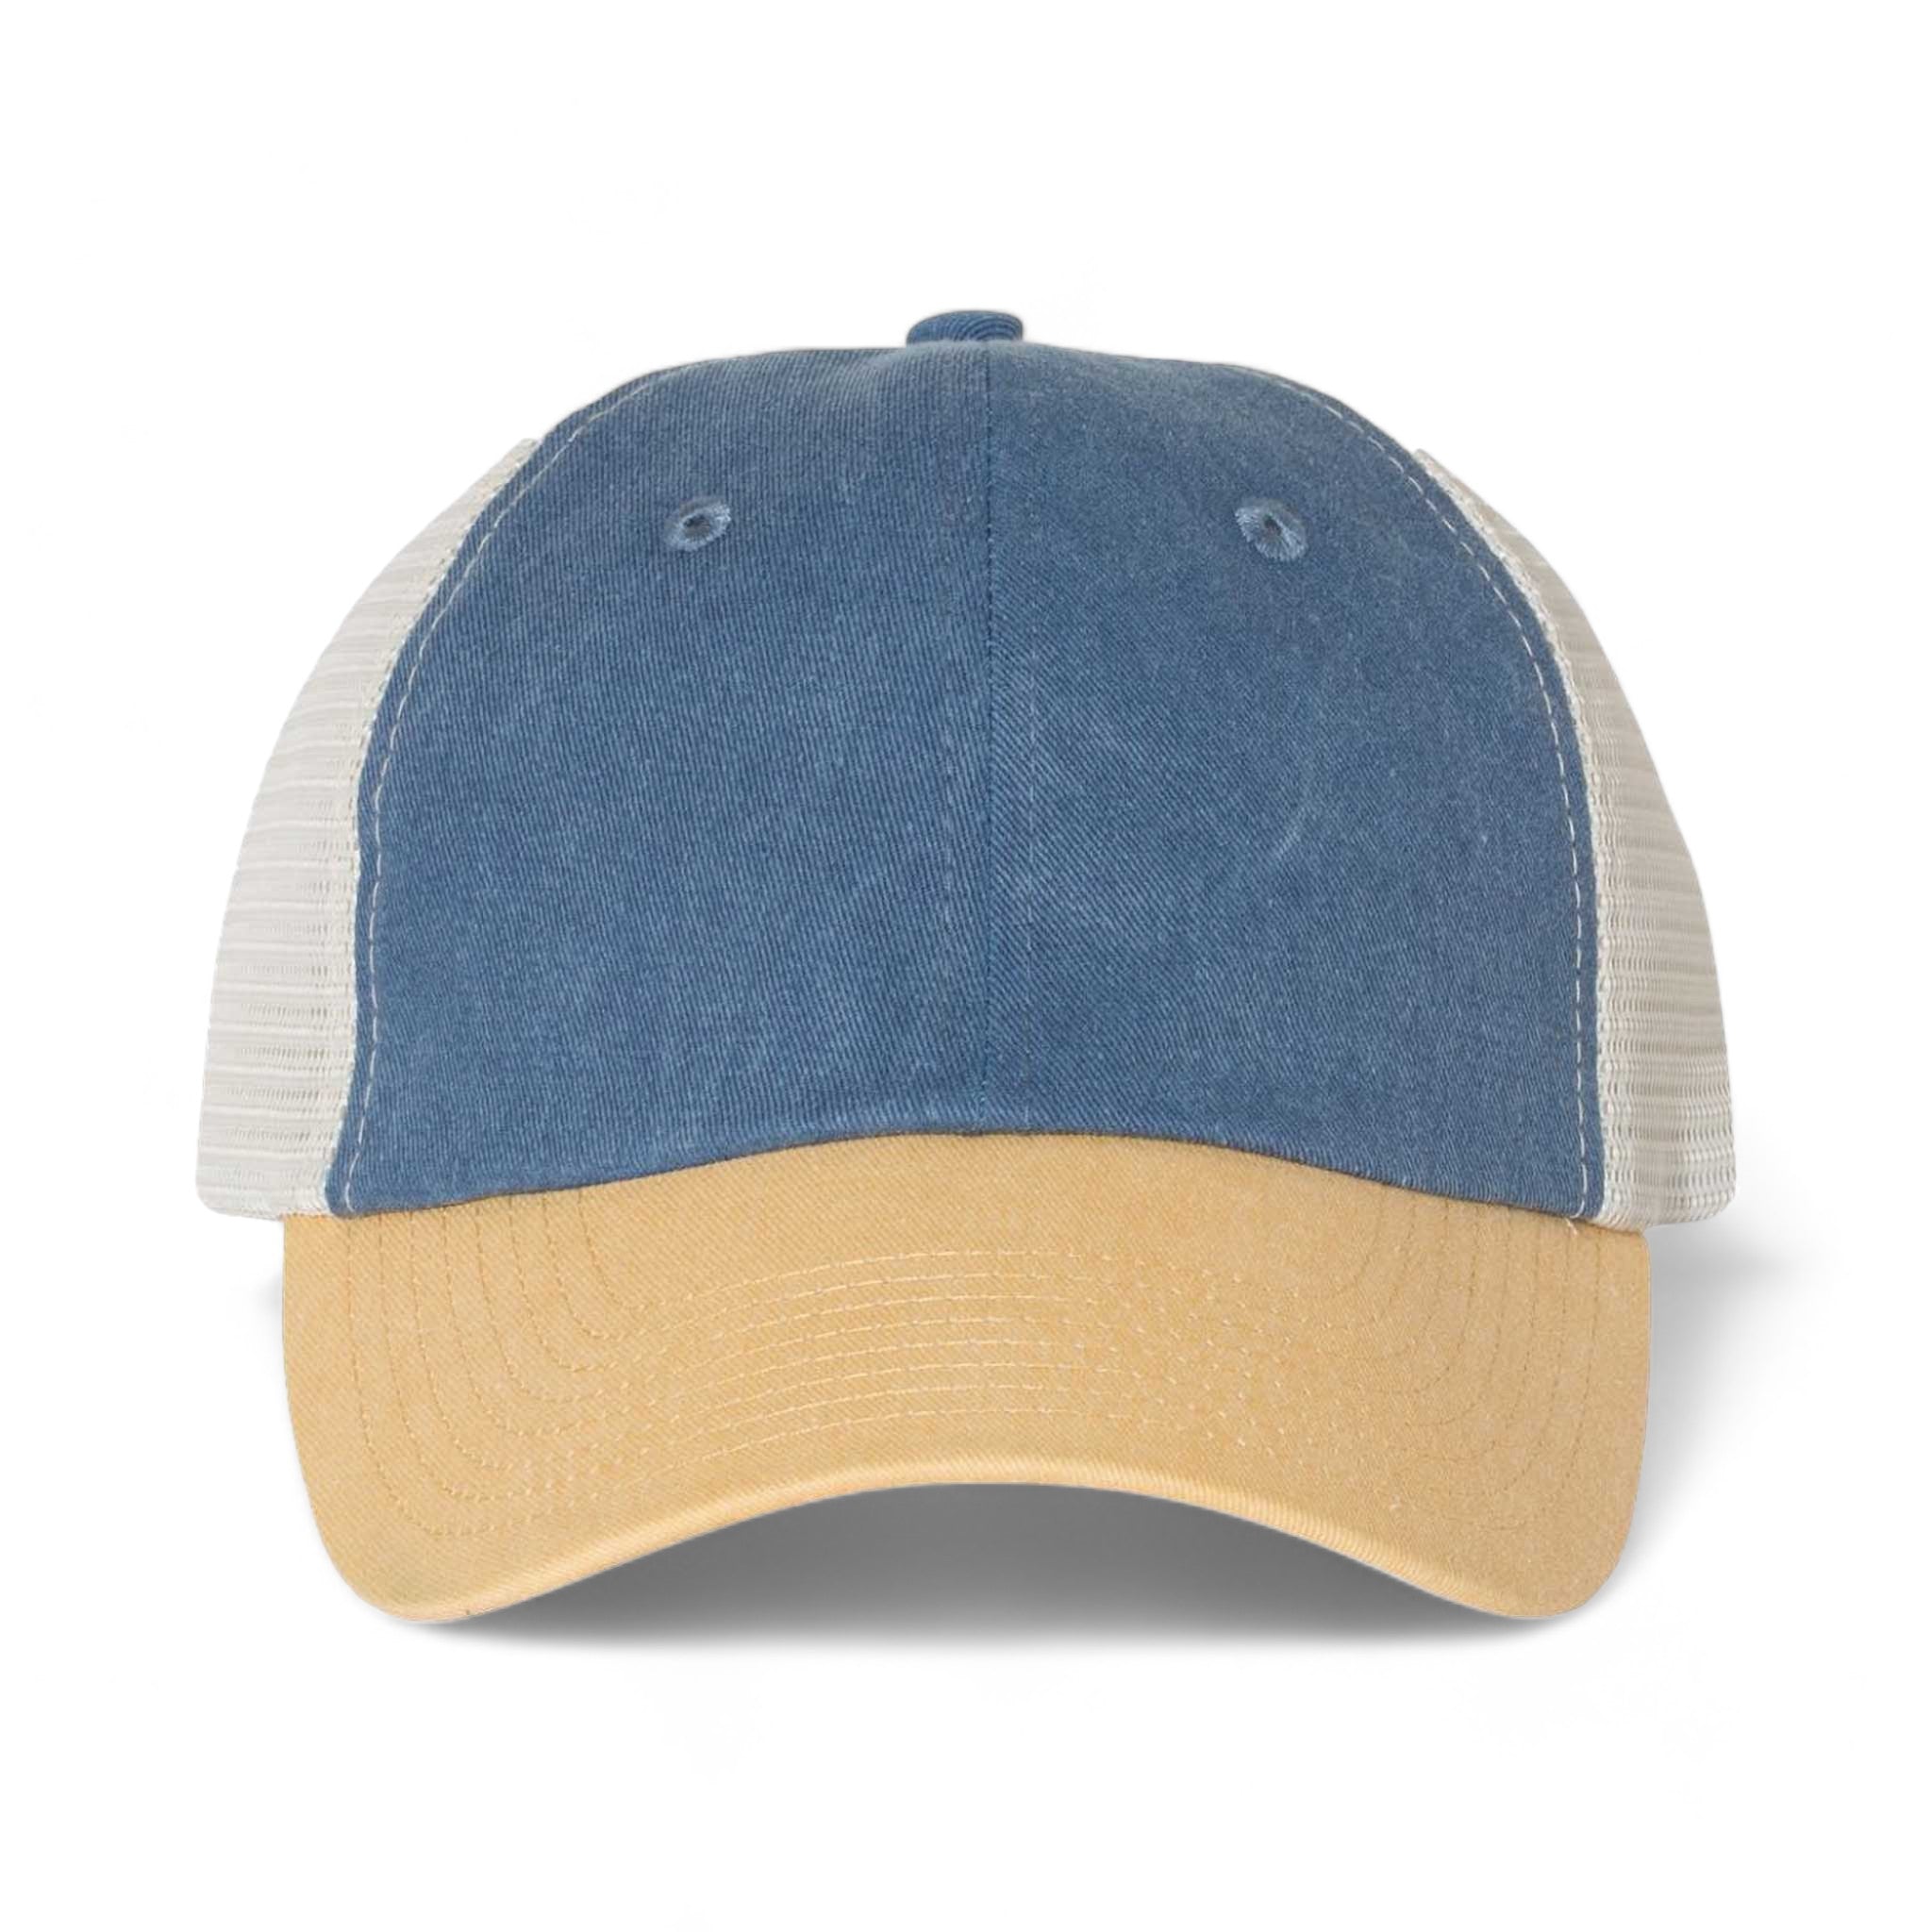 Front view of Sportsman SP510 custom hat in royal, mustard and stone